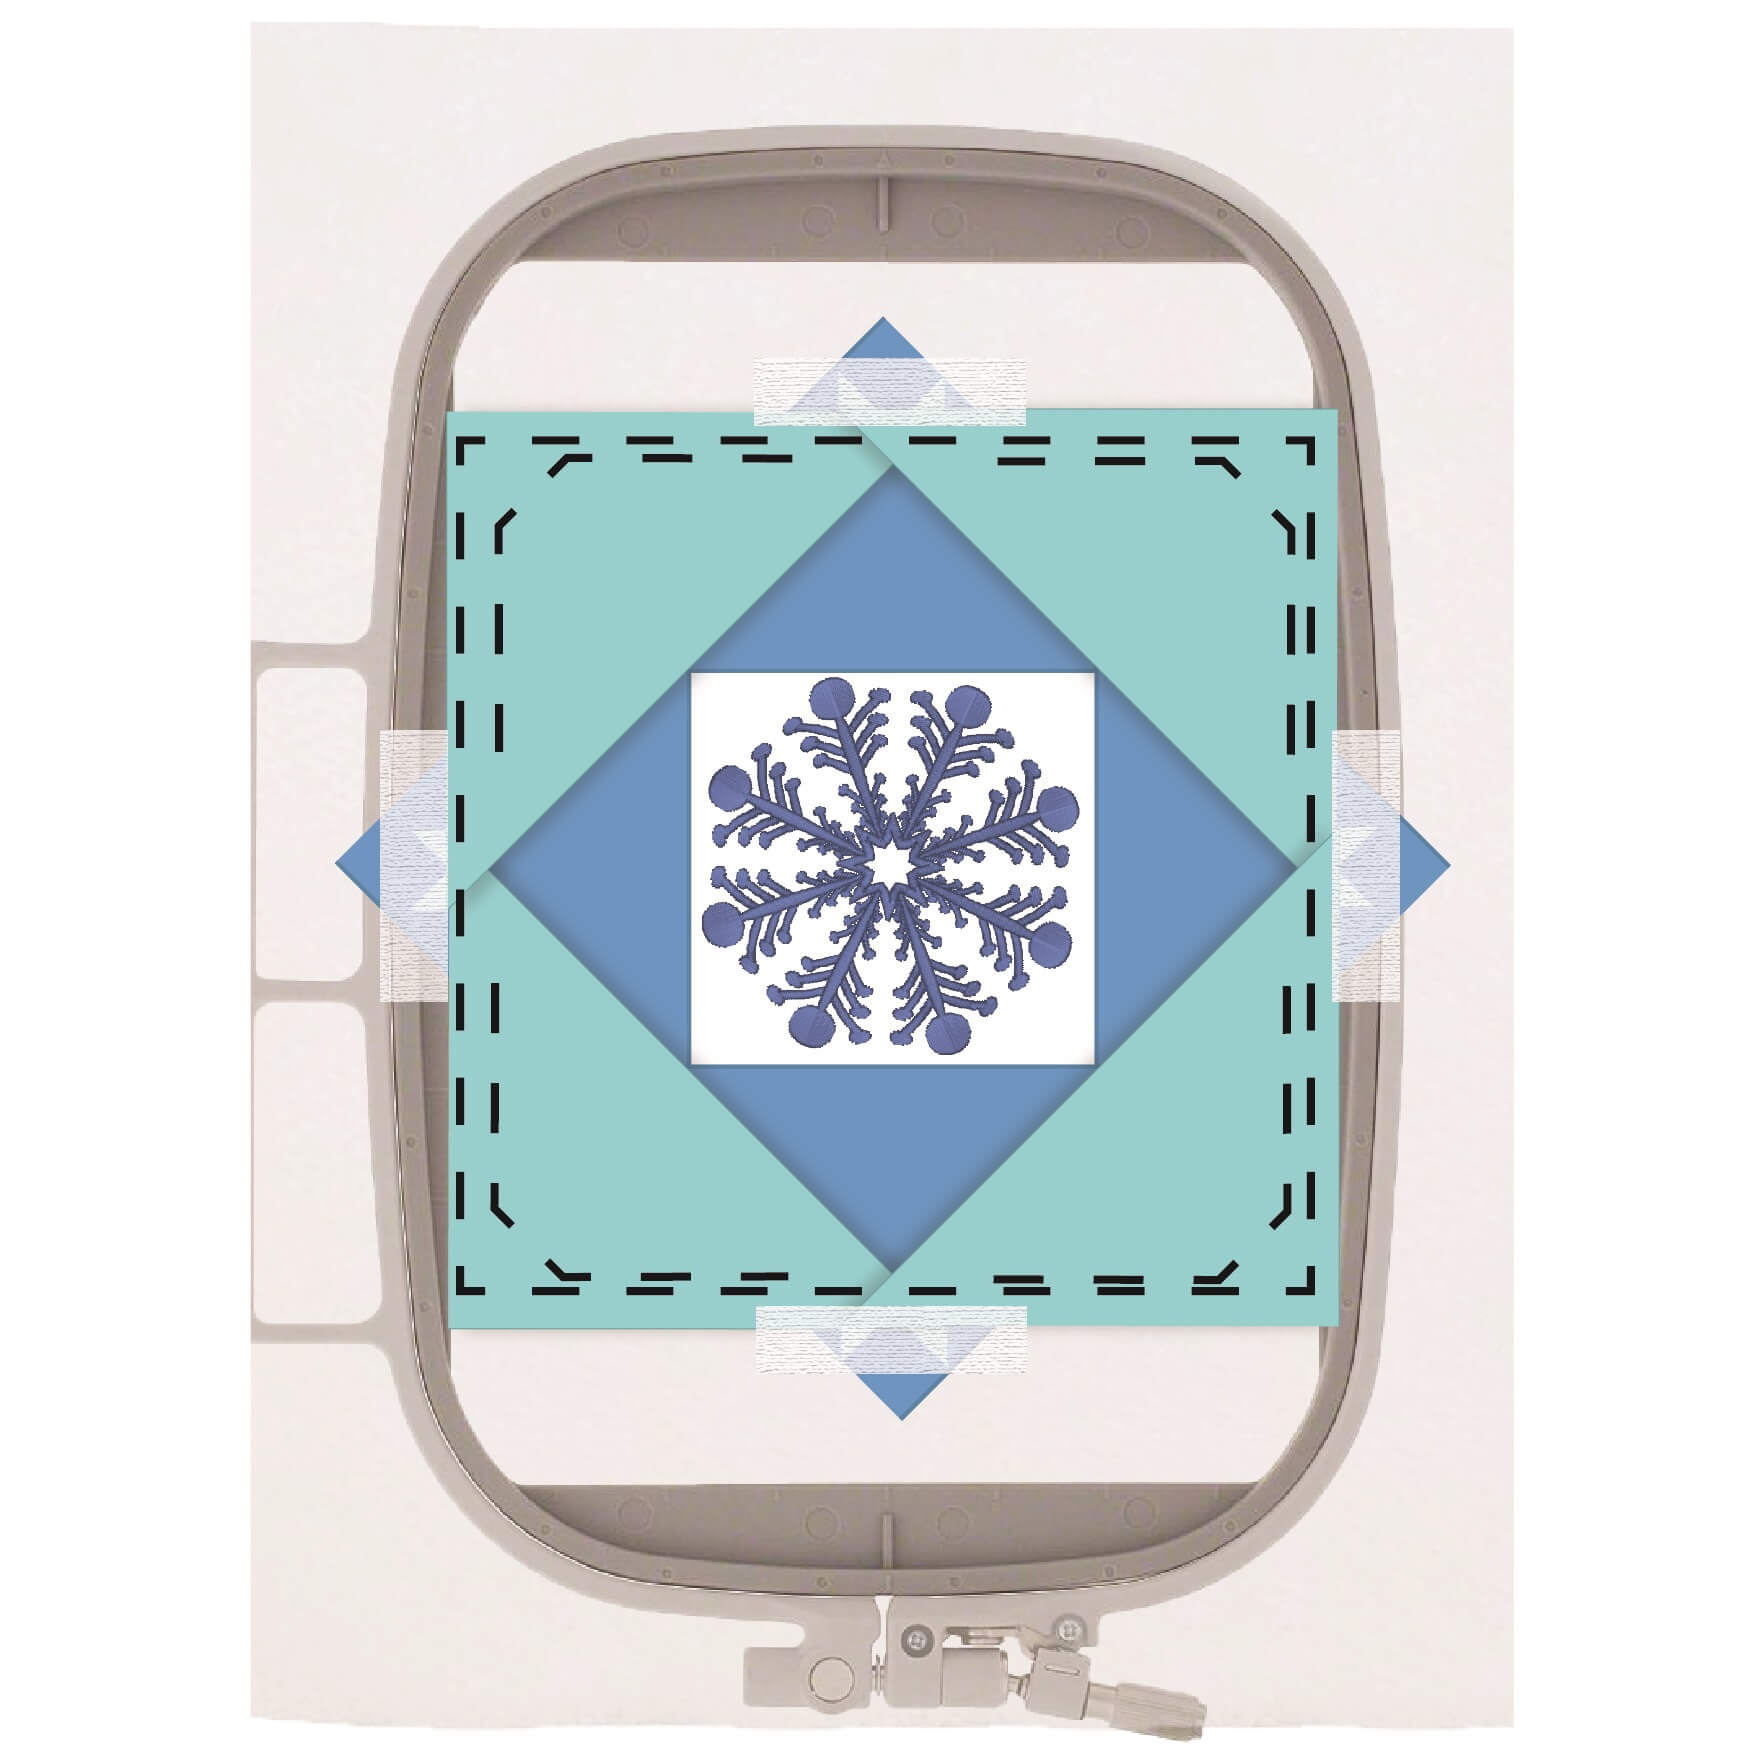 Exclusive Quick Quilting in the Hoop: Winter Snowflakes Embroidery Collection and Book available at ShopNZP.com